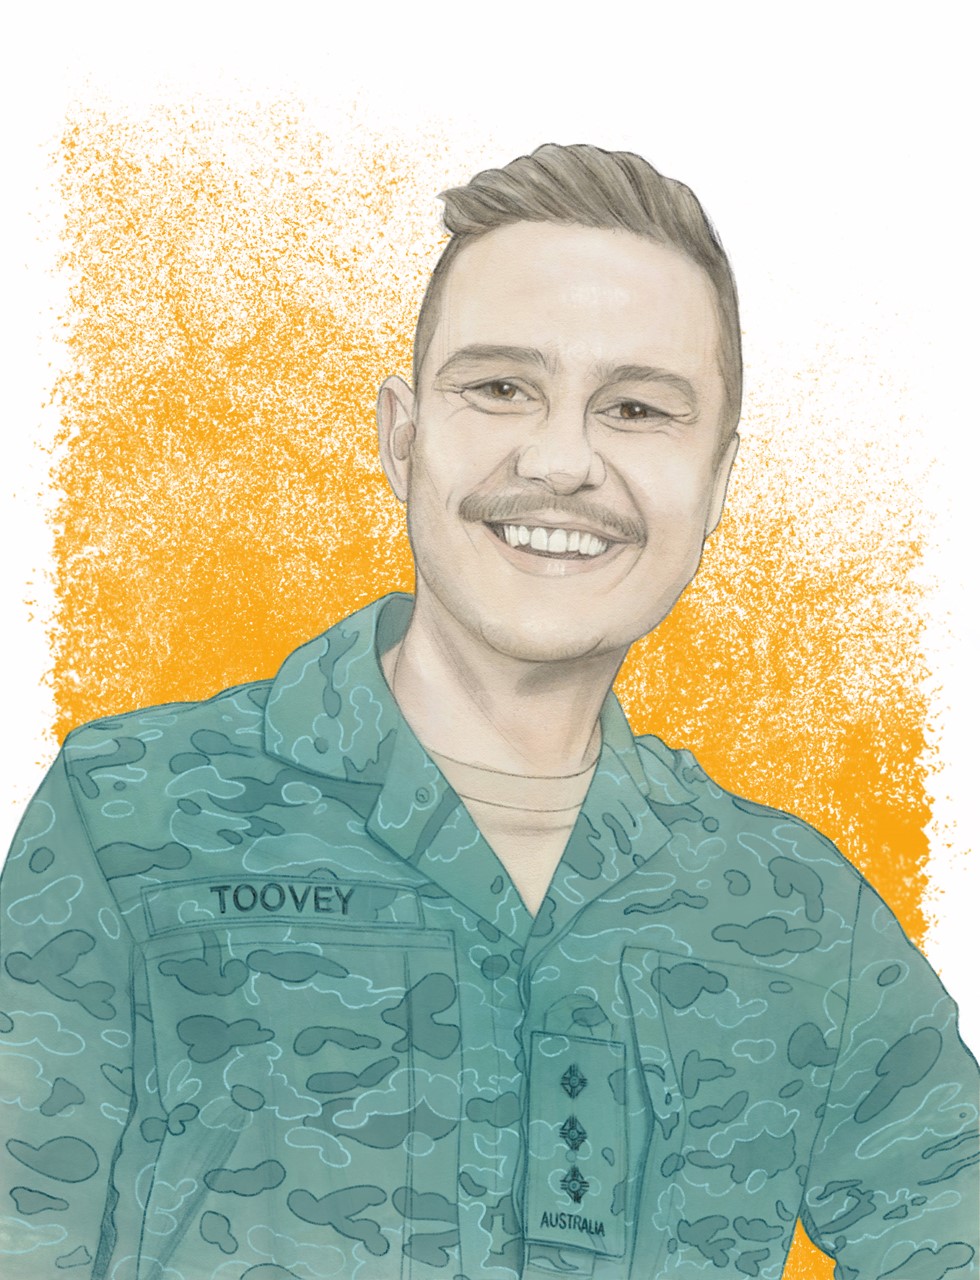 Illustration of Hugo Toovey in Army uniform